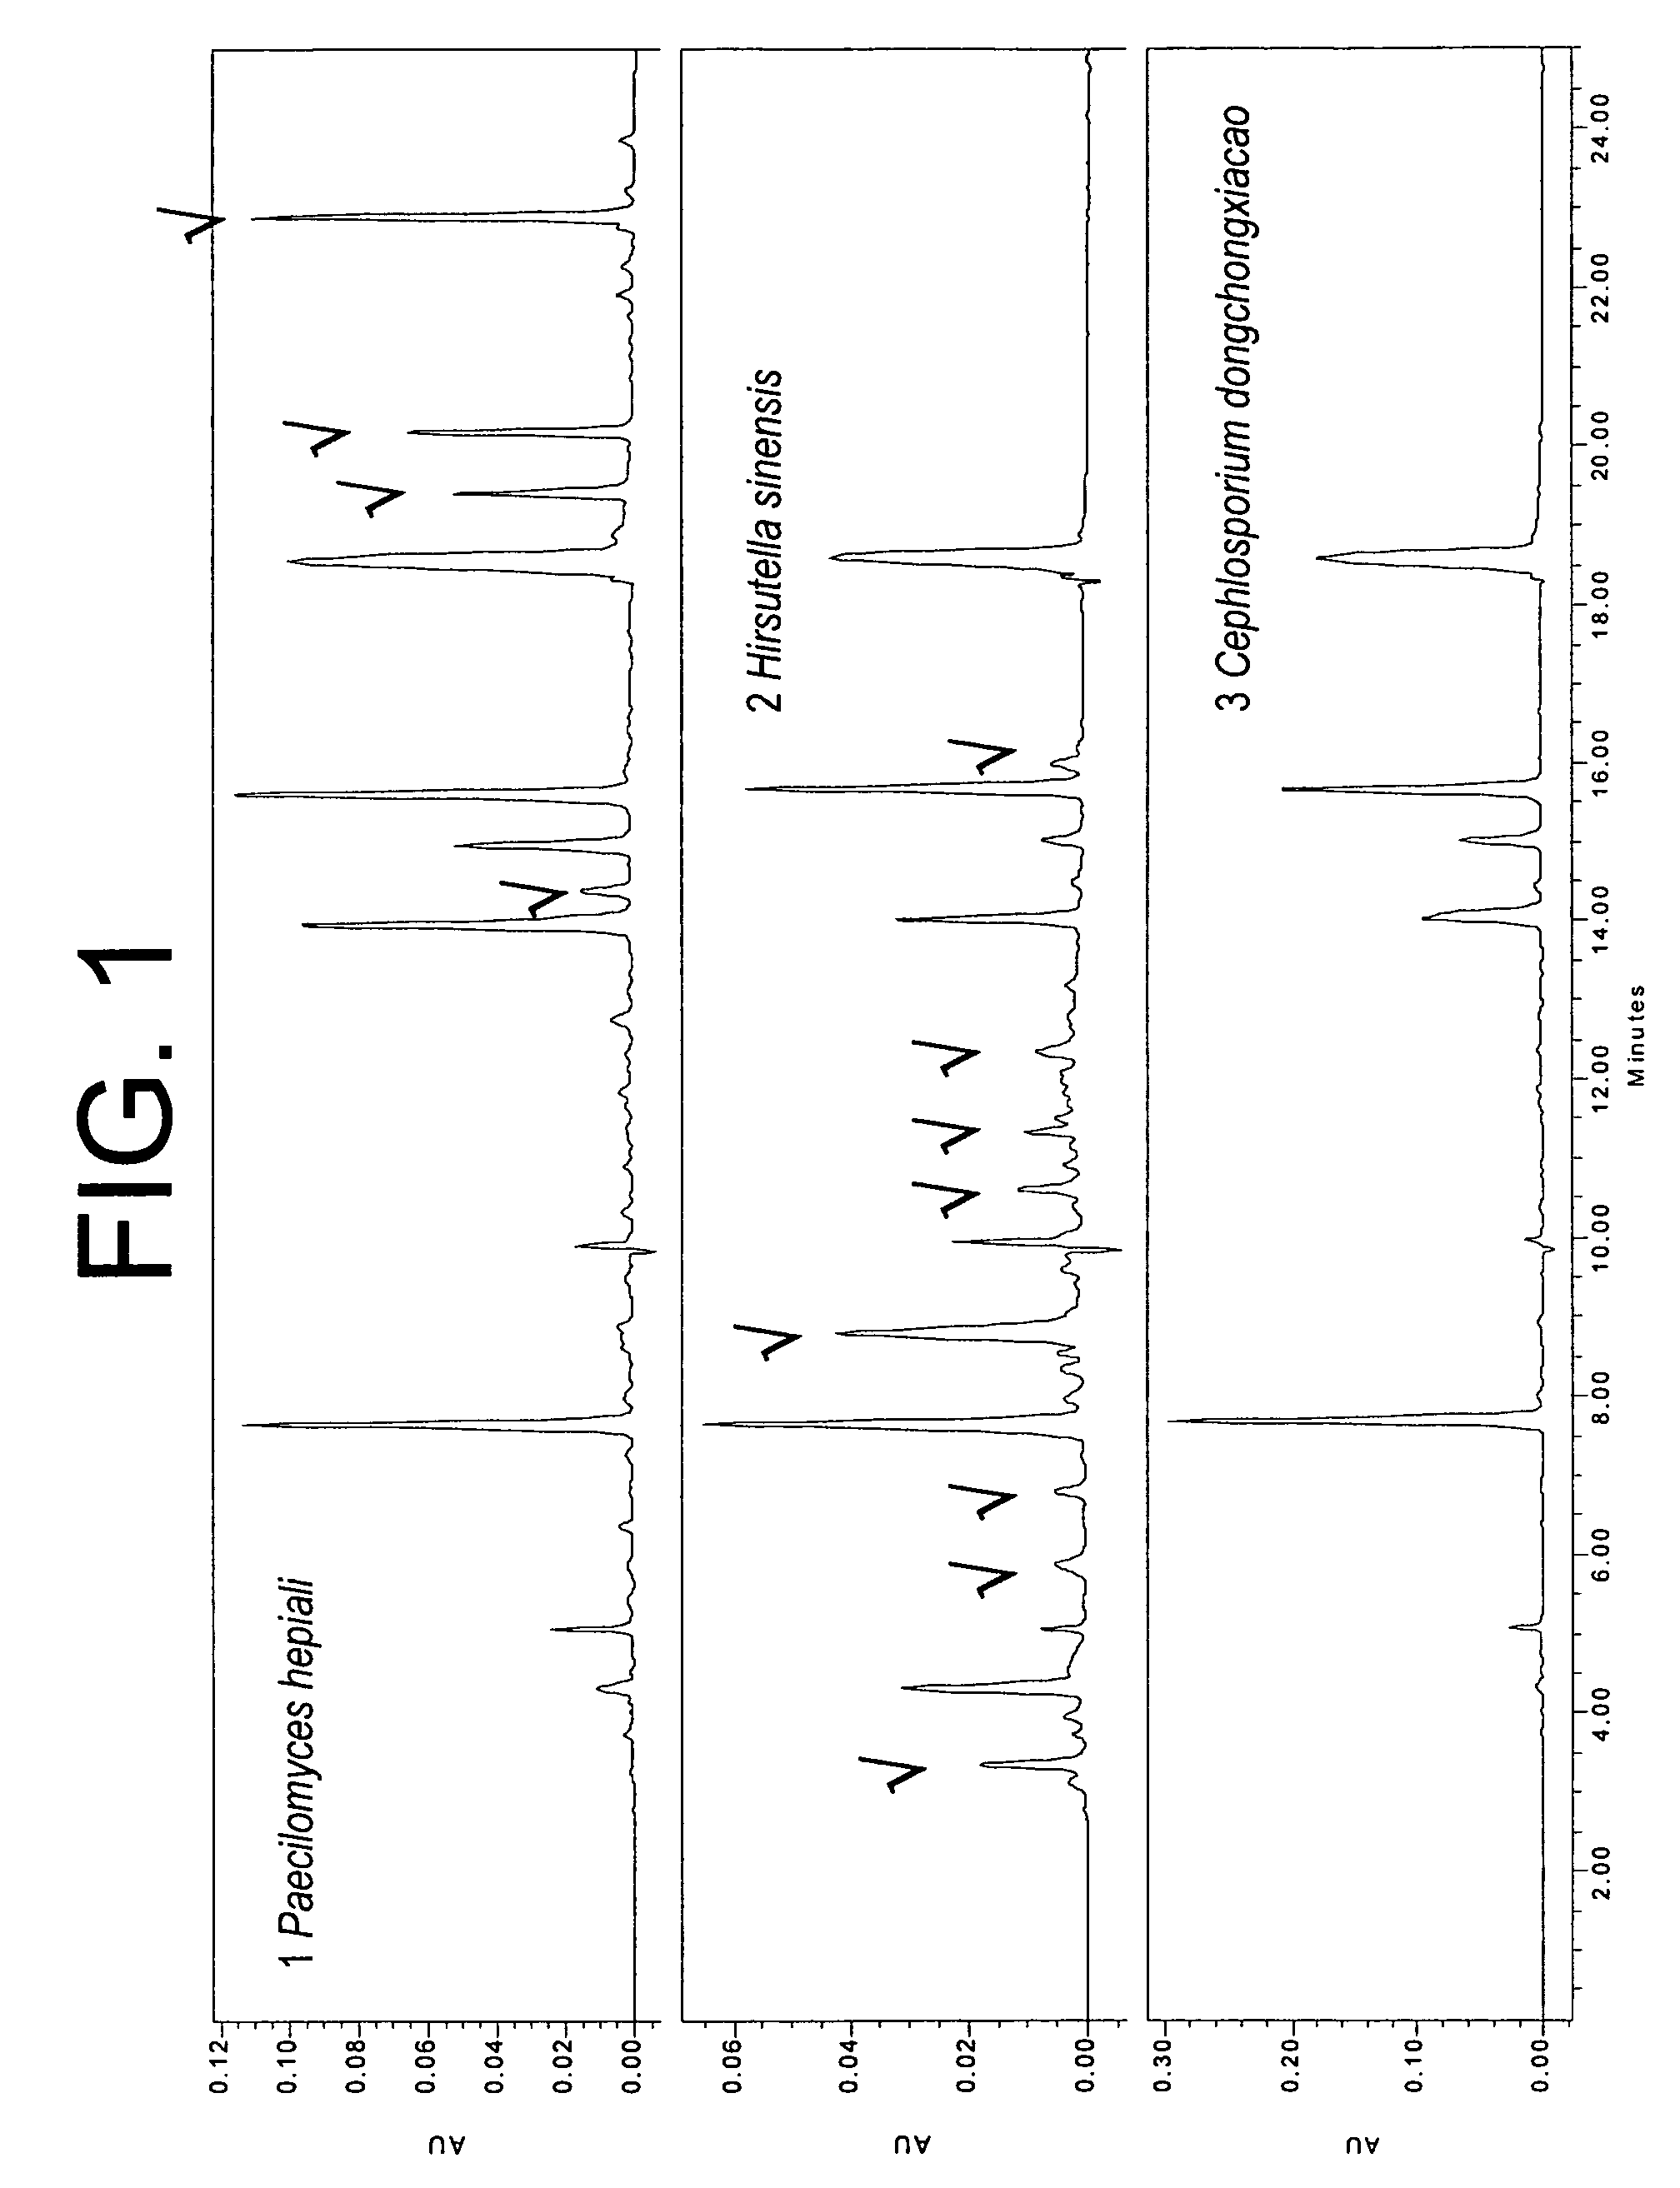 Fungal-derived formulations and associated methods